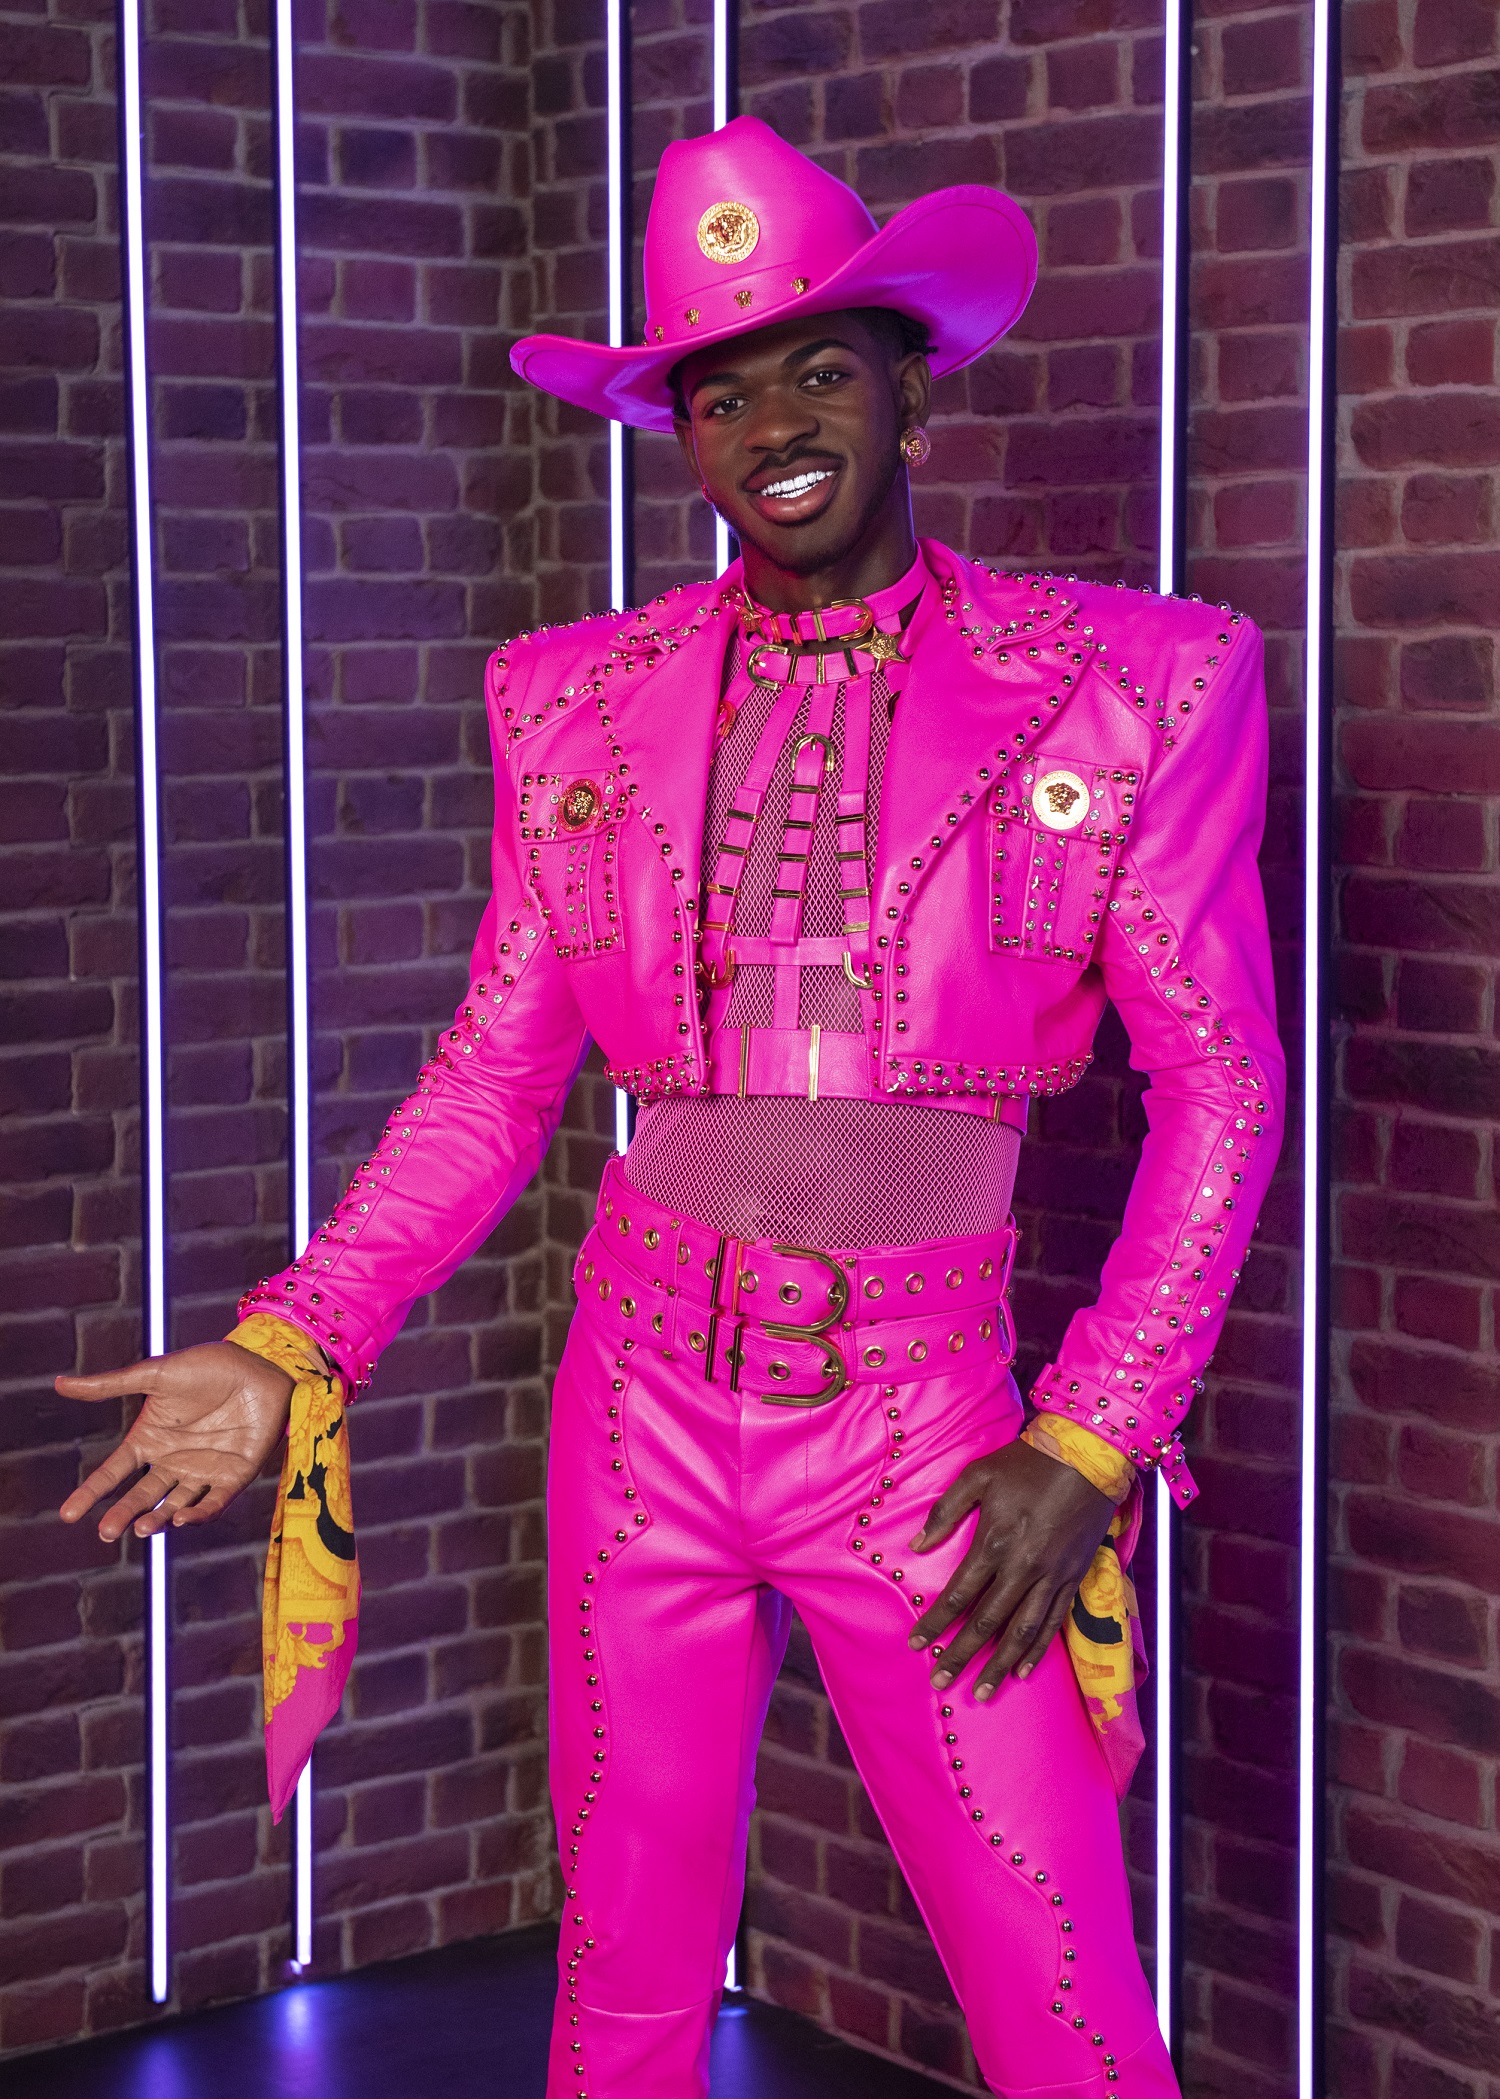 Madame Tussauds London’s artists put the finishing touches to the new figure of two-time GRAMMY award-winning artist Lil Nas X, available to see in the attraction from the 25th of August www.madametussauds.com/london